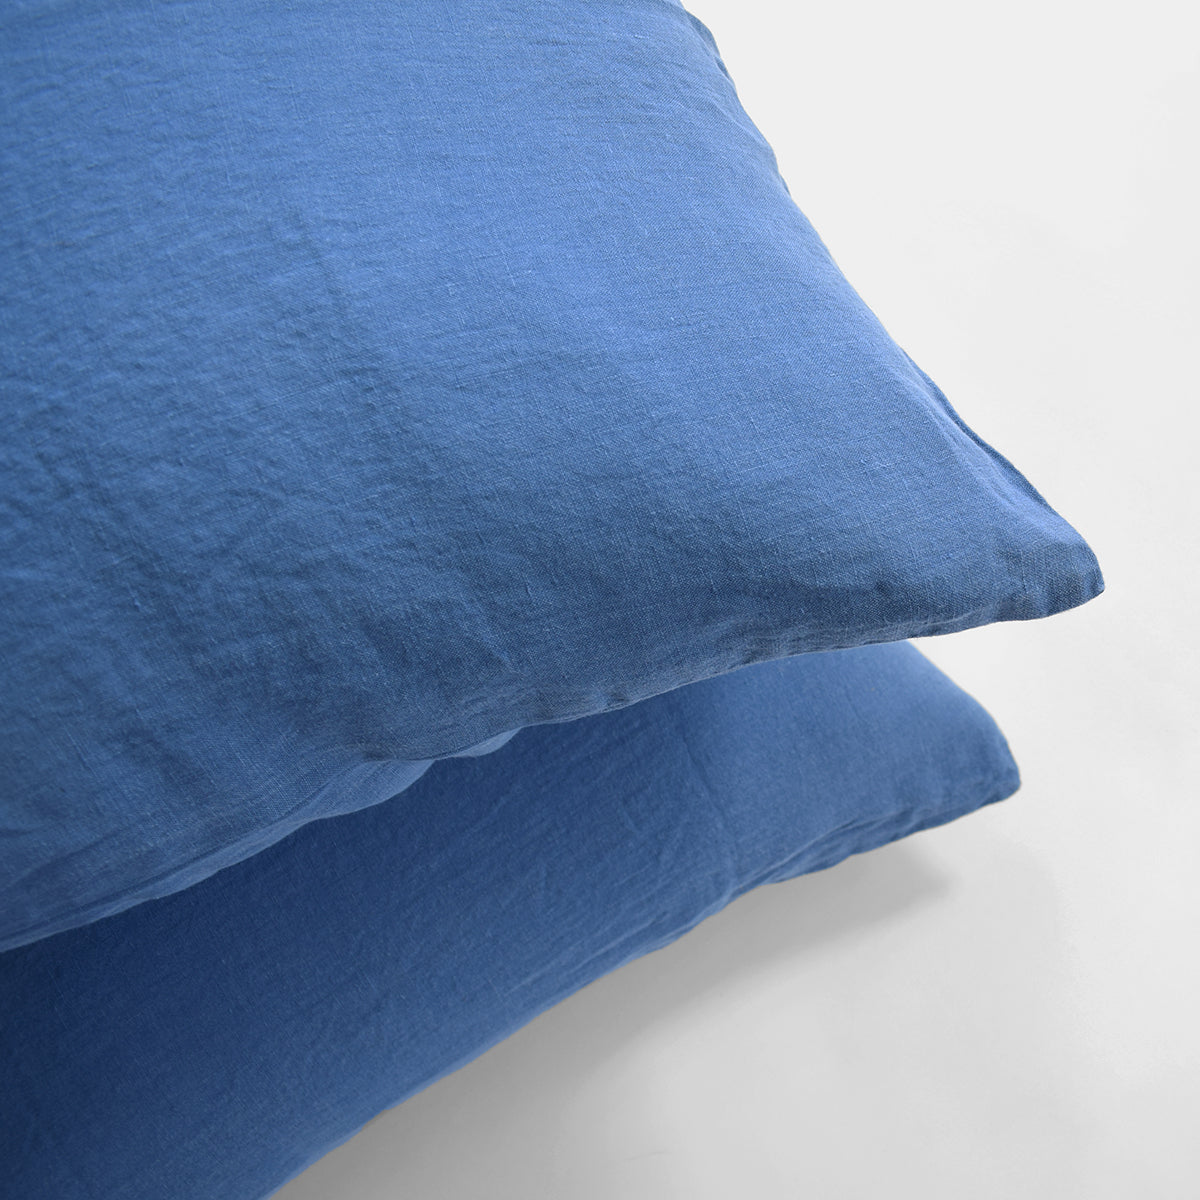 Linge Particulier Atlantic Blue Euro Linen Pillowcase Sham for a colorful linen bedding look in electric blue - Collyer&#39;s Mansion